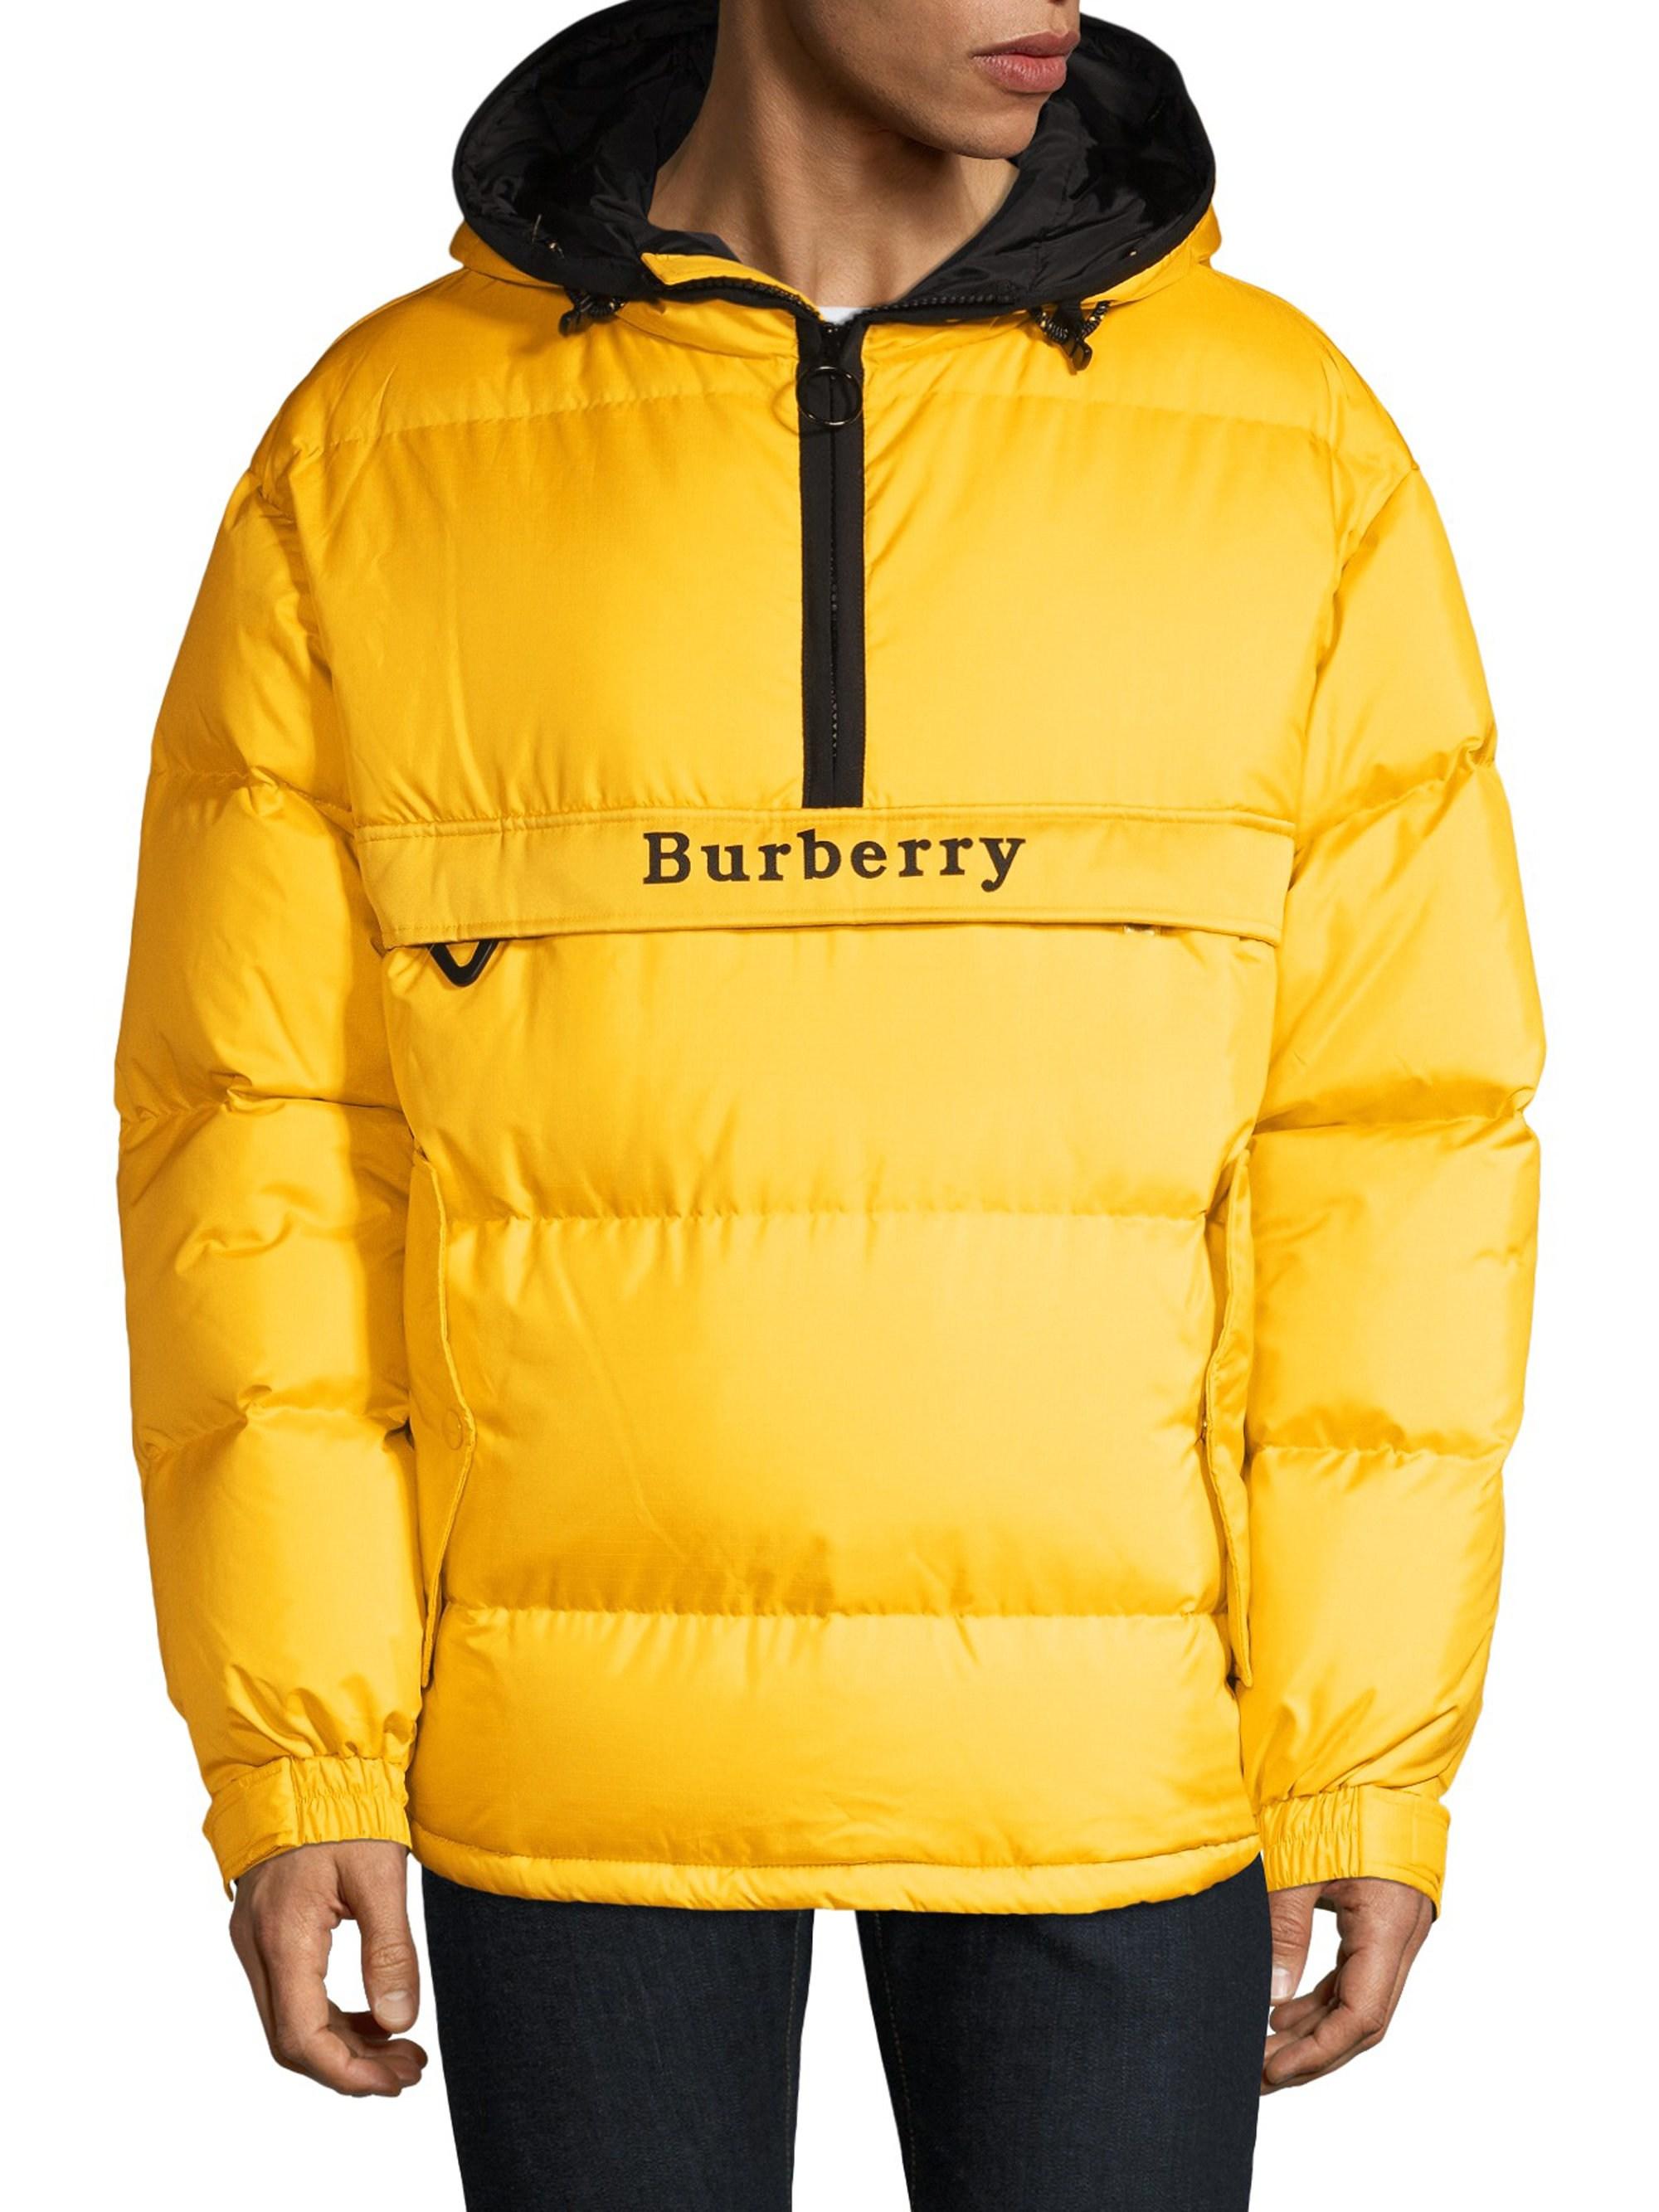 burberry jacket yellow Online Shopping for Women, Men, Kids Fashion &  Lifestyle|Free Delivery & Returns! -